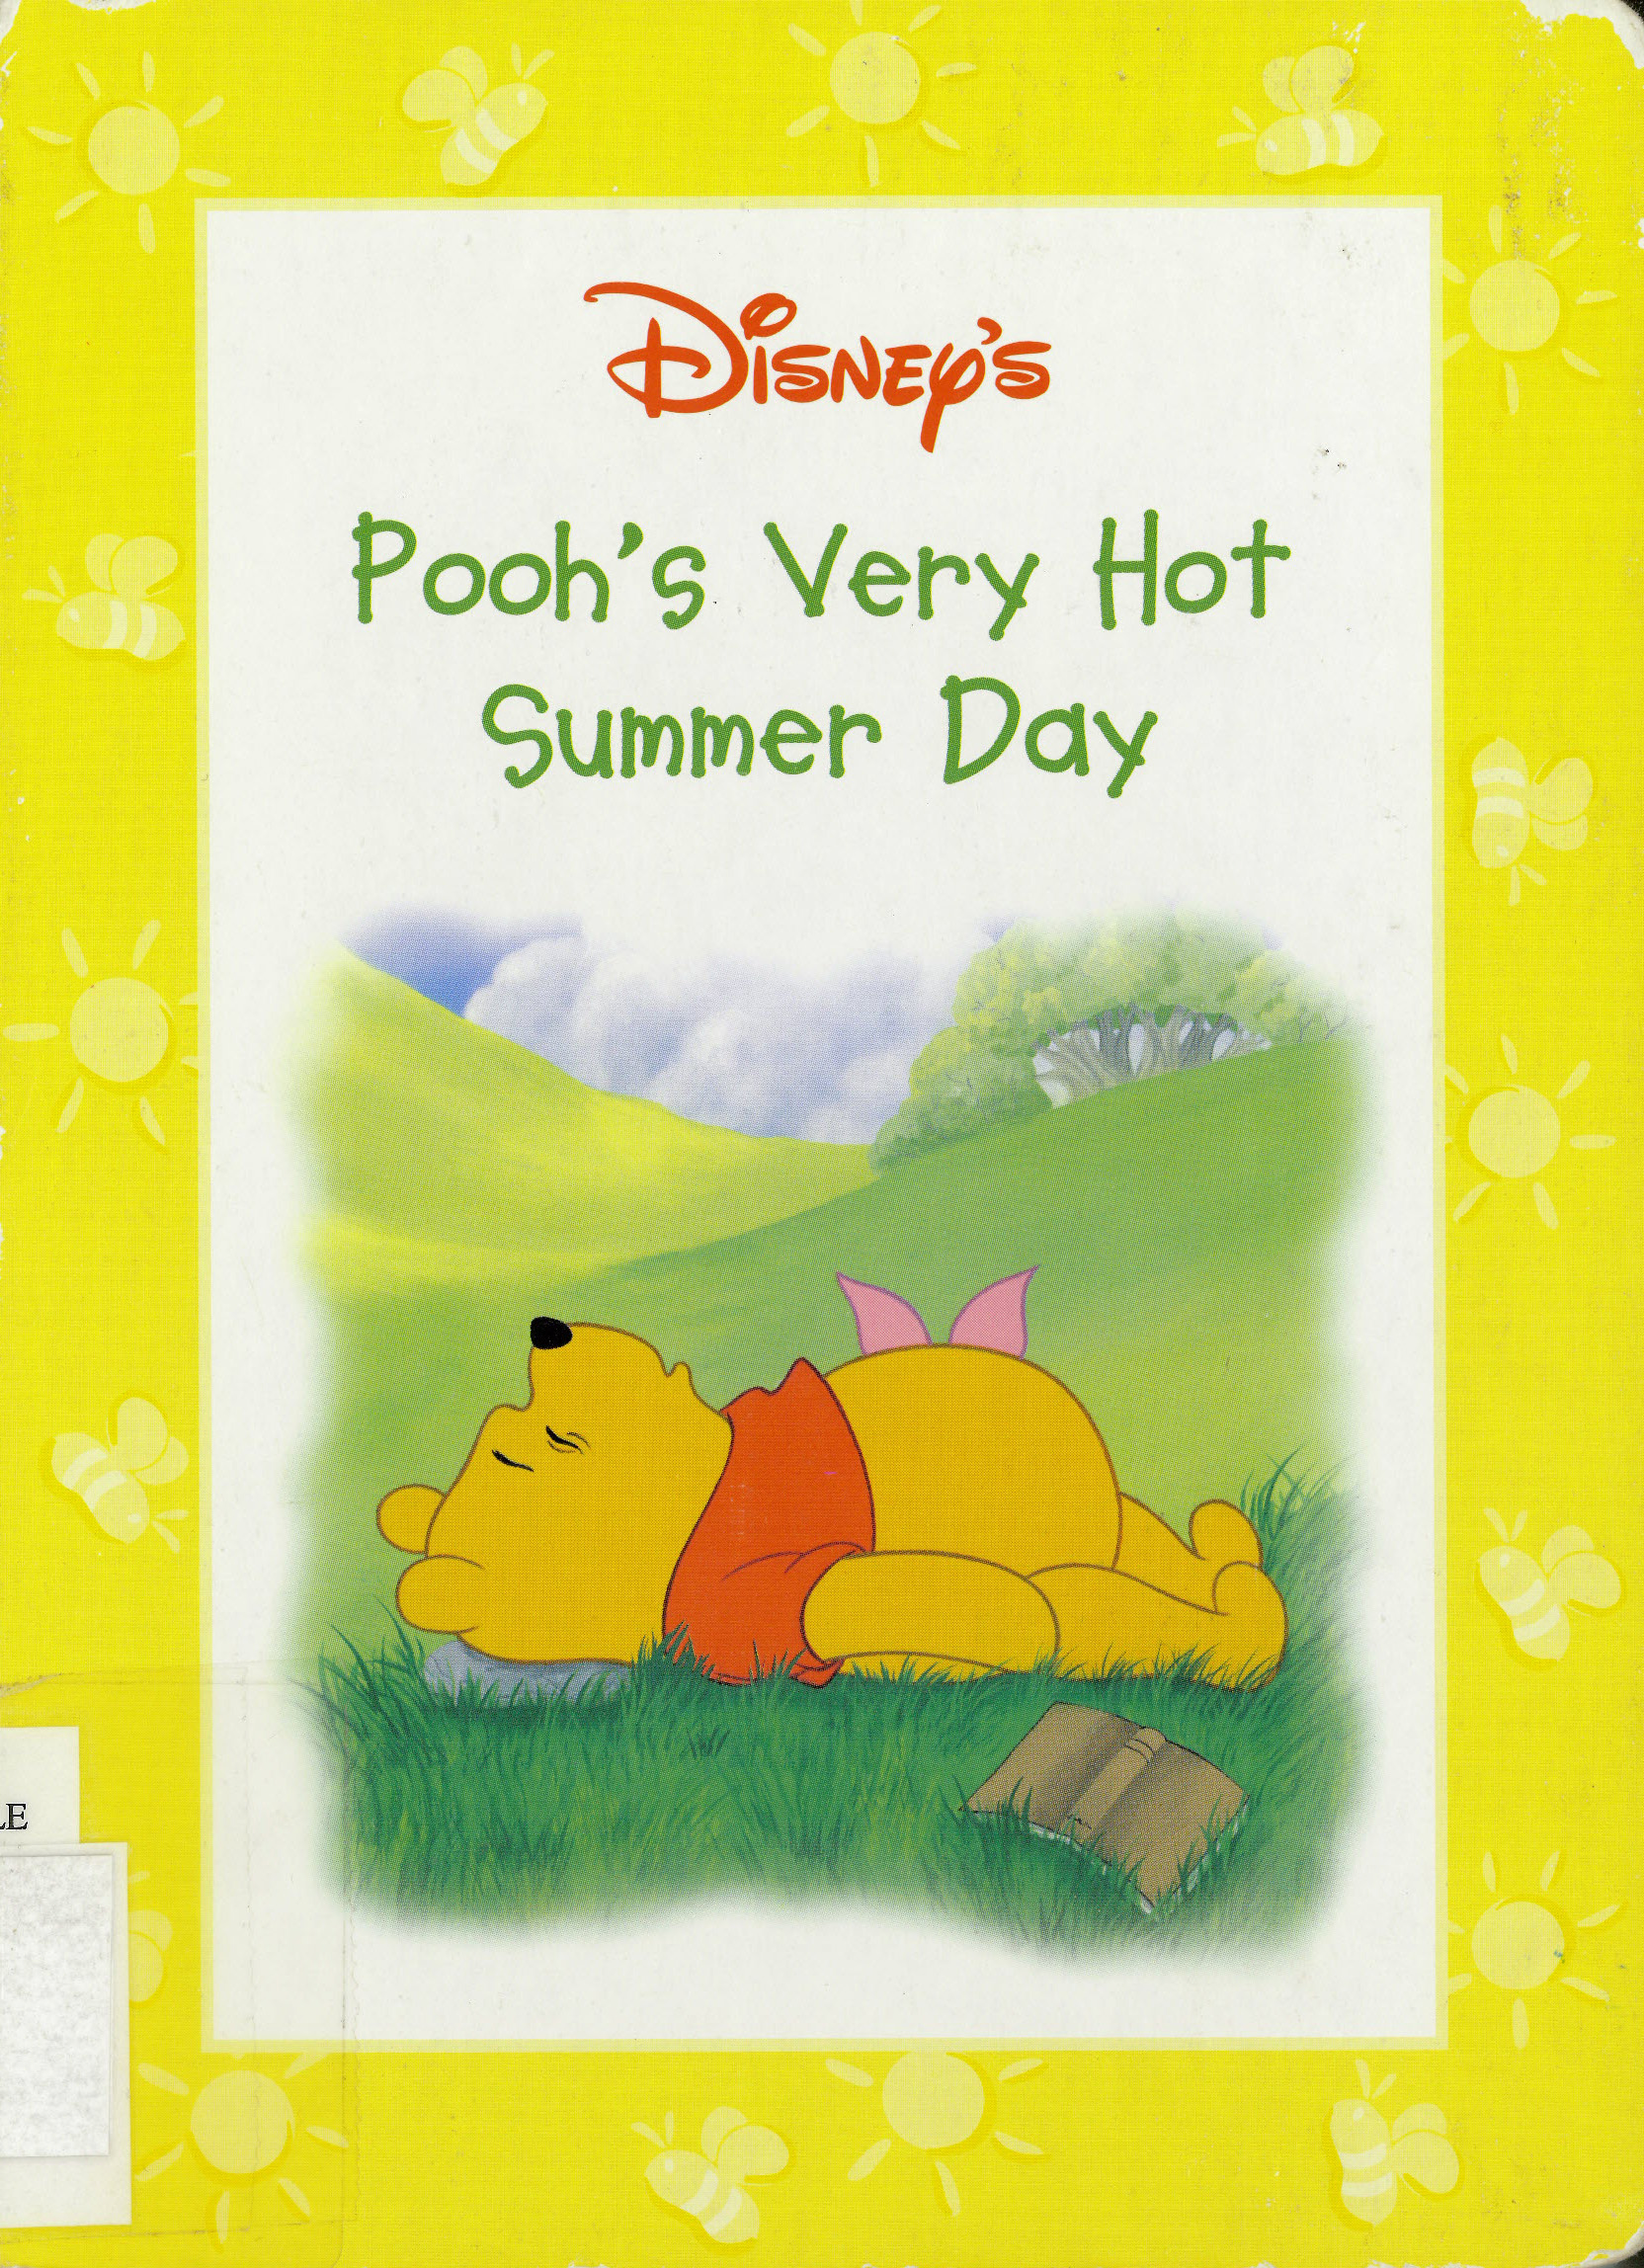 Disney's Pooh's very hot summer day